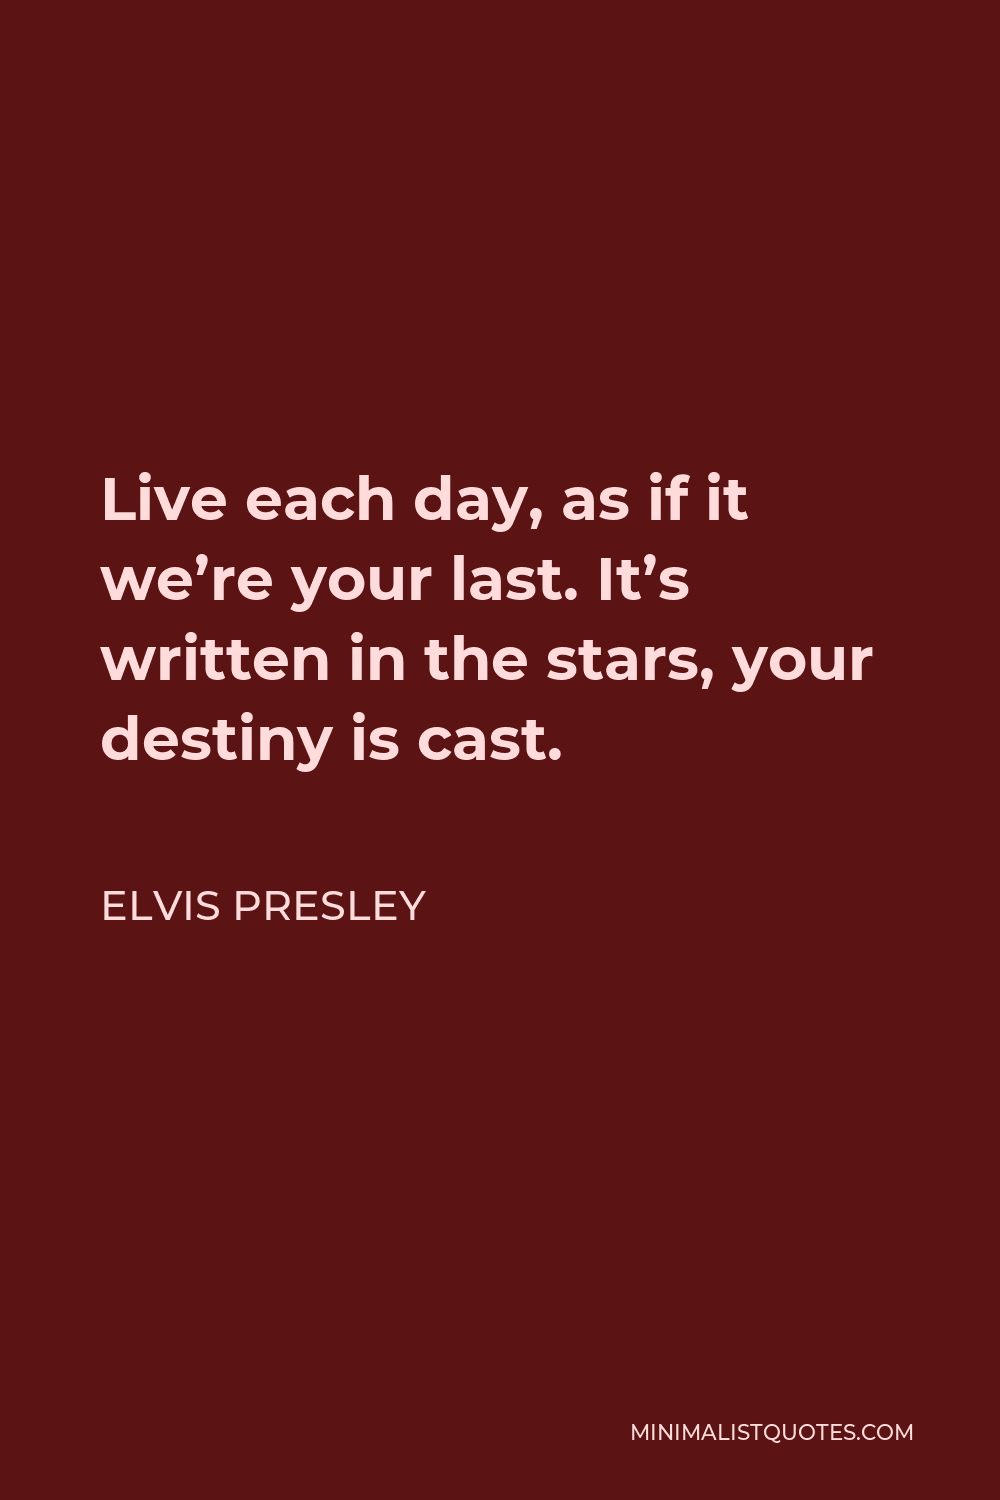 Elvis Presley Quote - Live each day, as if it we’re your last. It’s written in the stars, your destiny is cast.